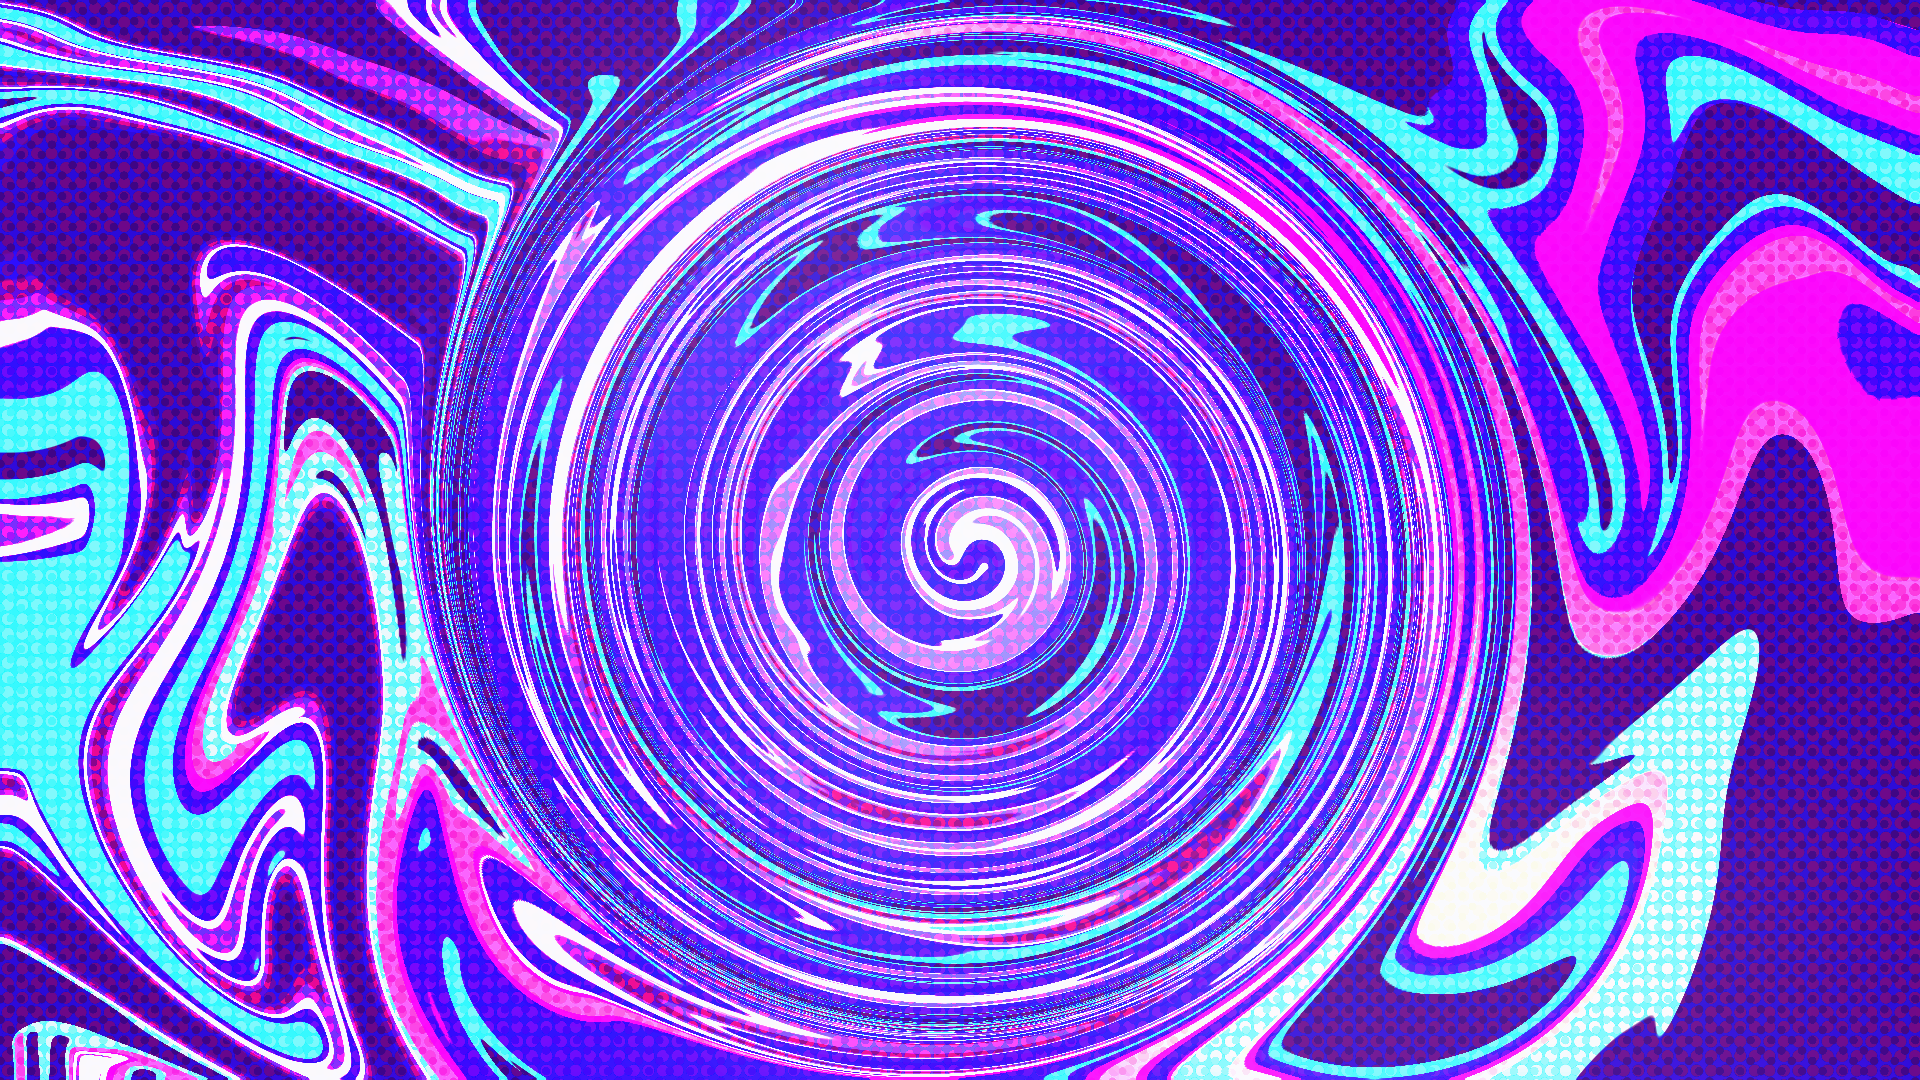 image of purple blue and pink spiral design